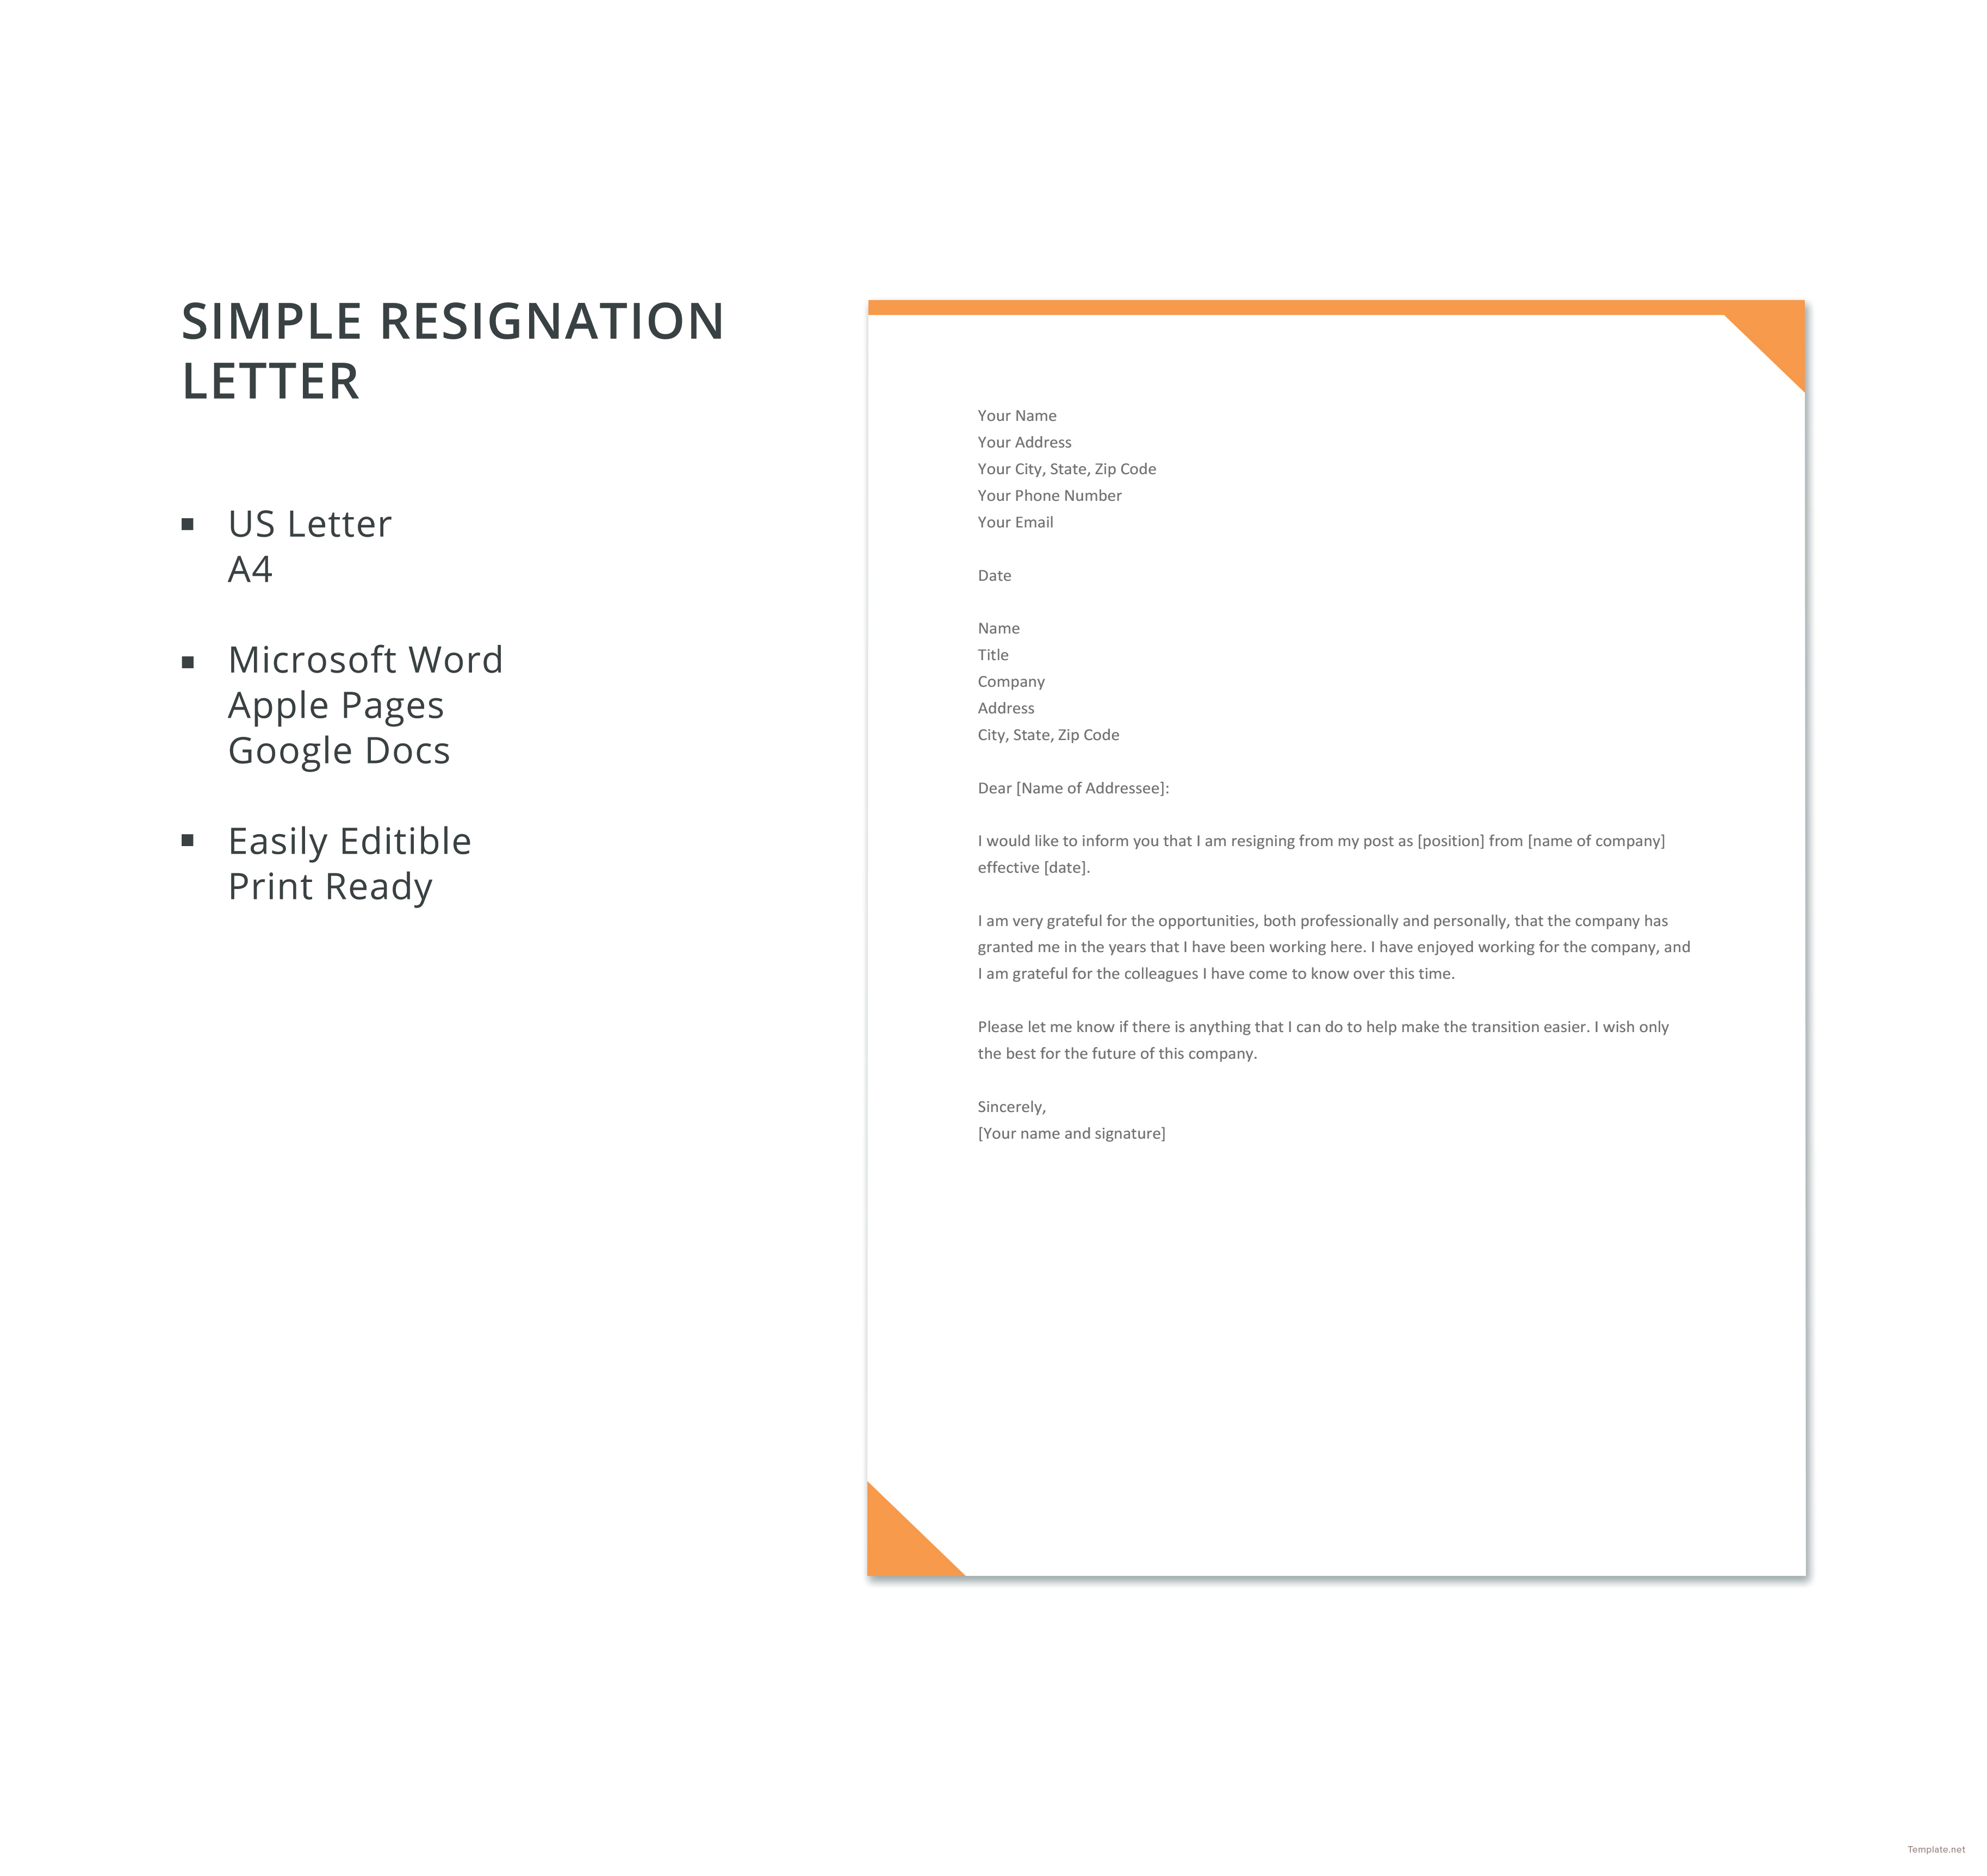 Free Simple Resignation Letter Template in Microsoft Word